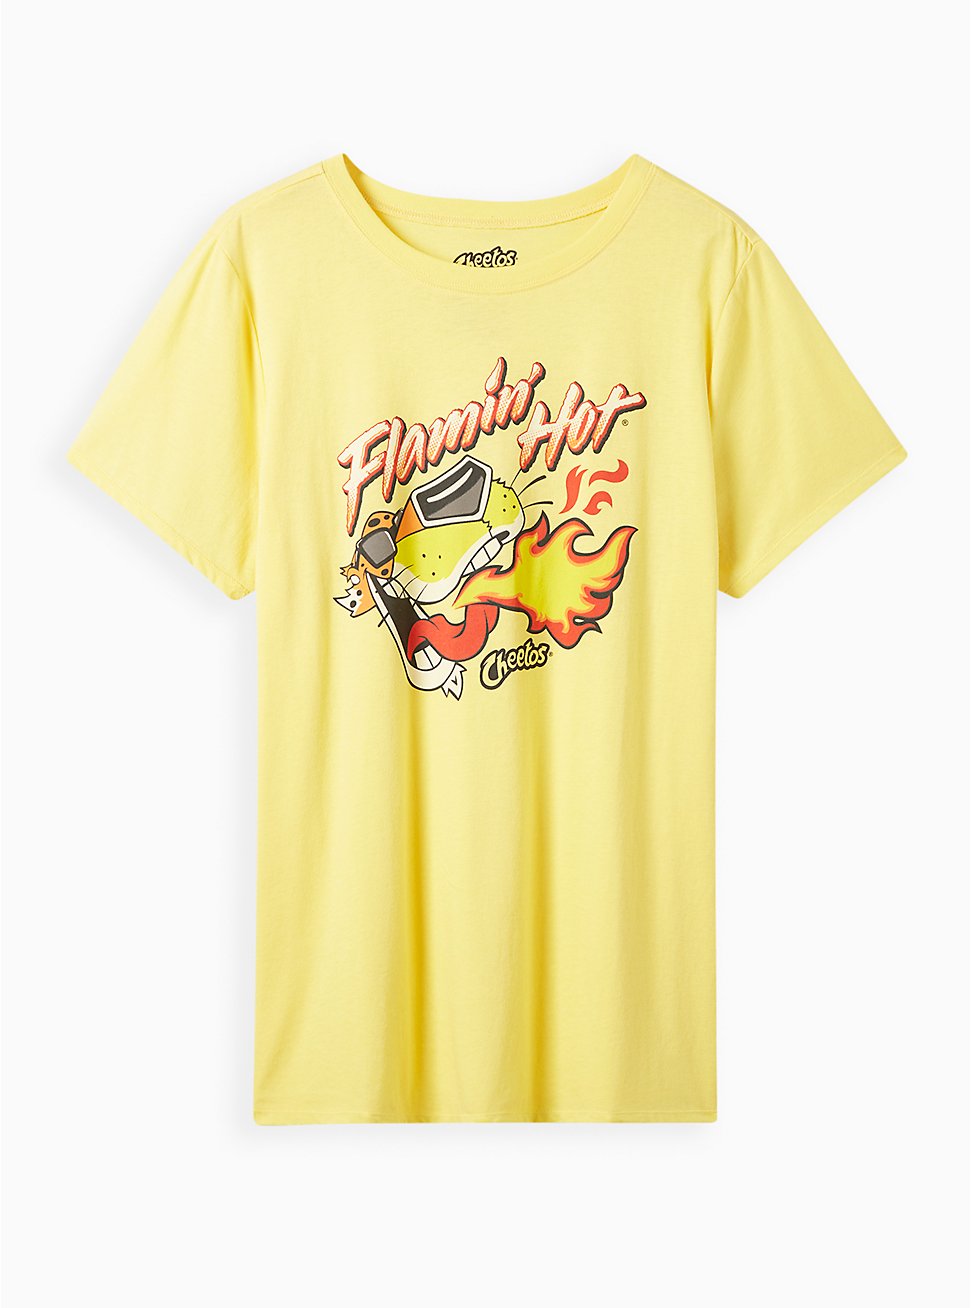 Plus Size Classic Fit Crew Tee – Cotton Hot Cheetos Chester Yellow, SUNDRESS: YELLOW, hi-res